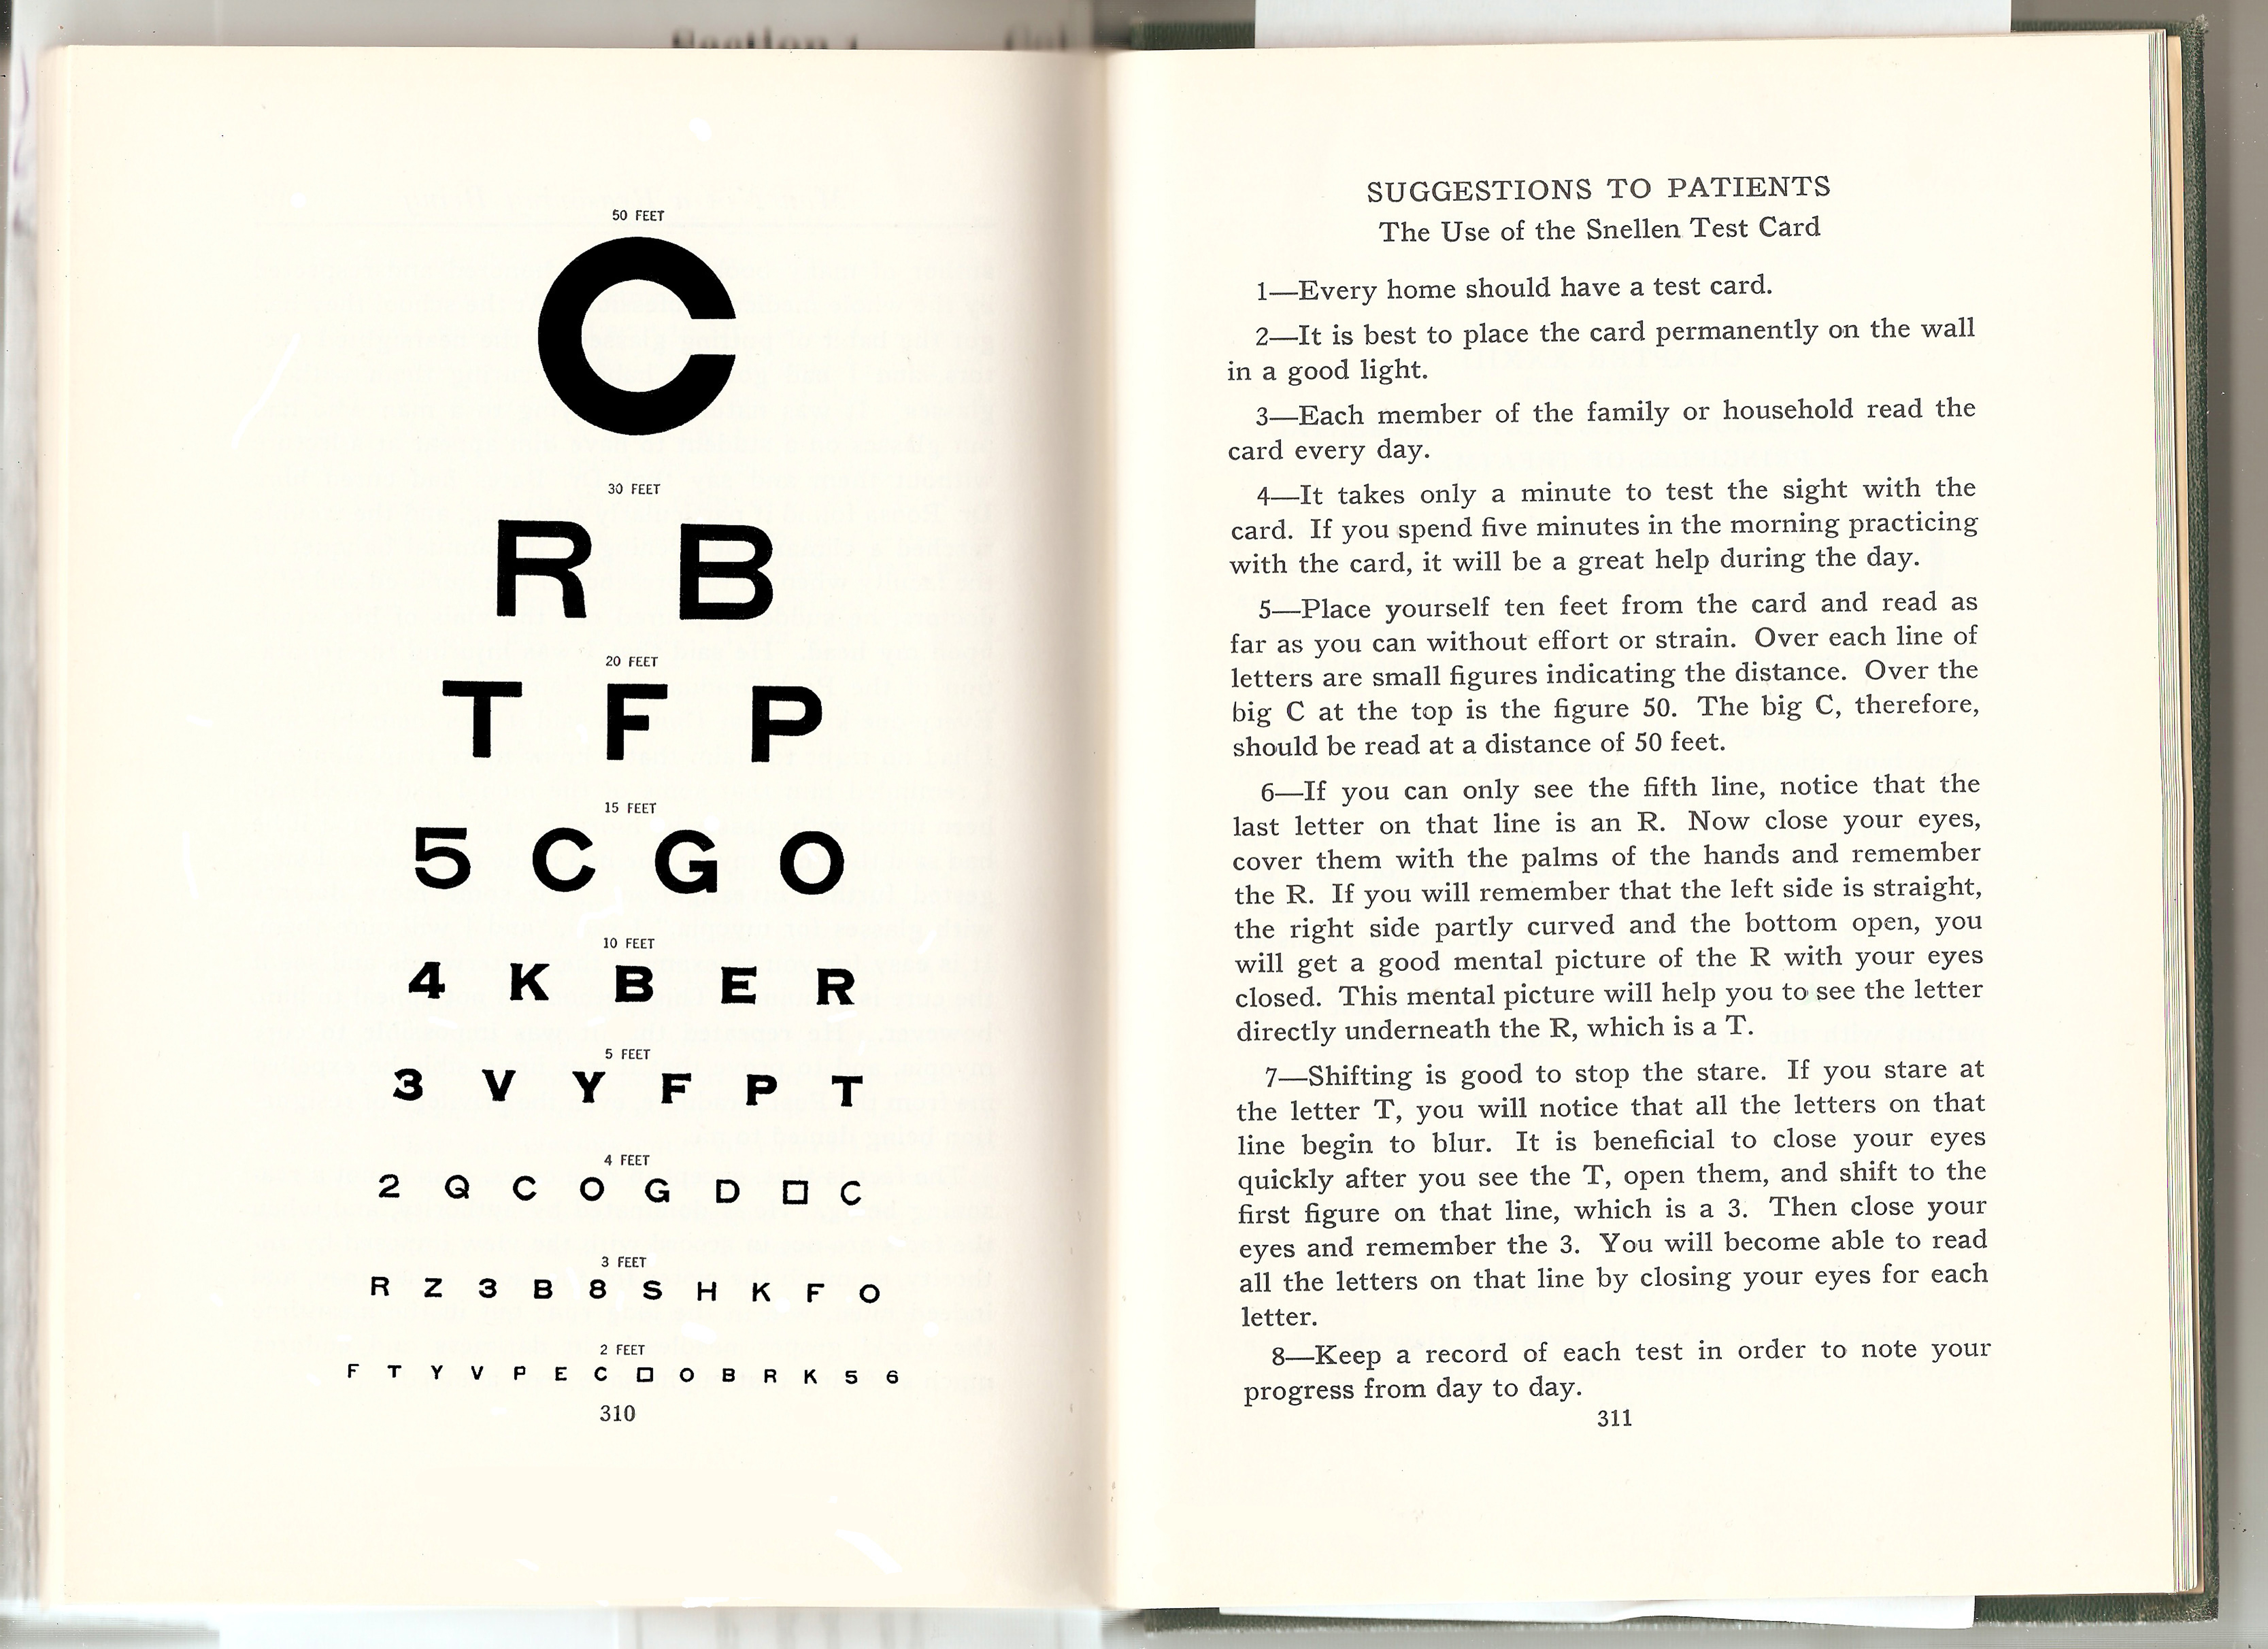 Dr. Bates and Emily's Oringal C Eyechart and Suggestions to Patients - 1940 Perfect Sight Without Glasses Final Print Edition